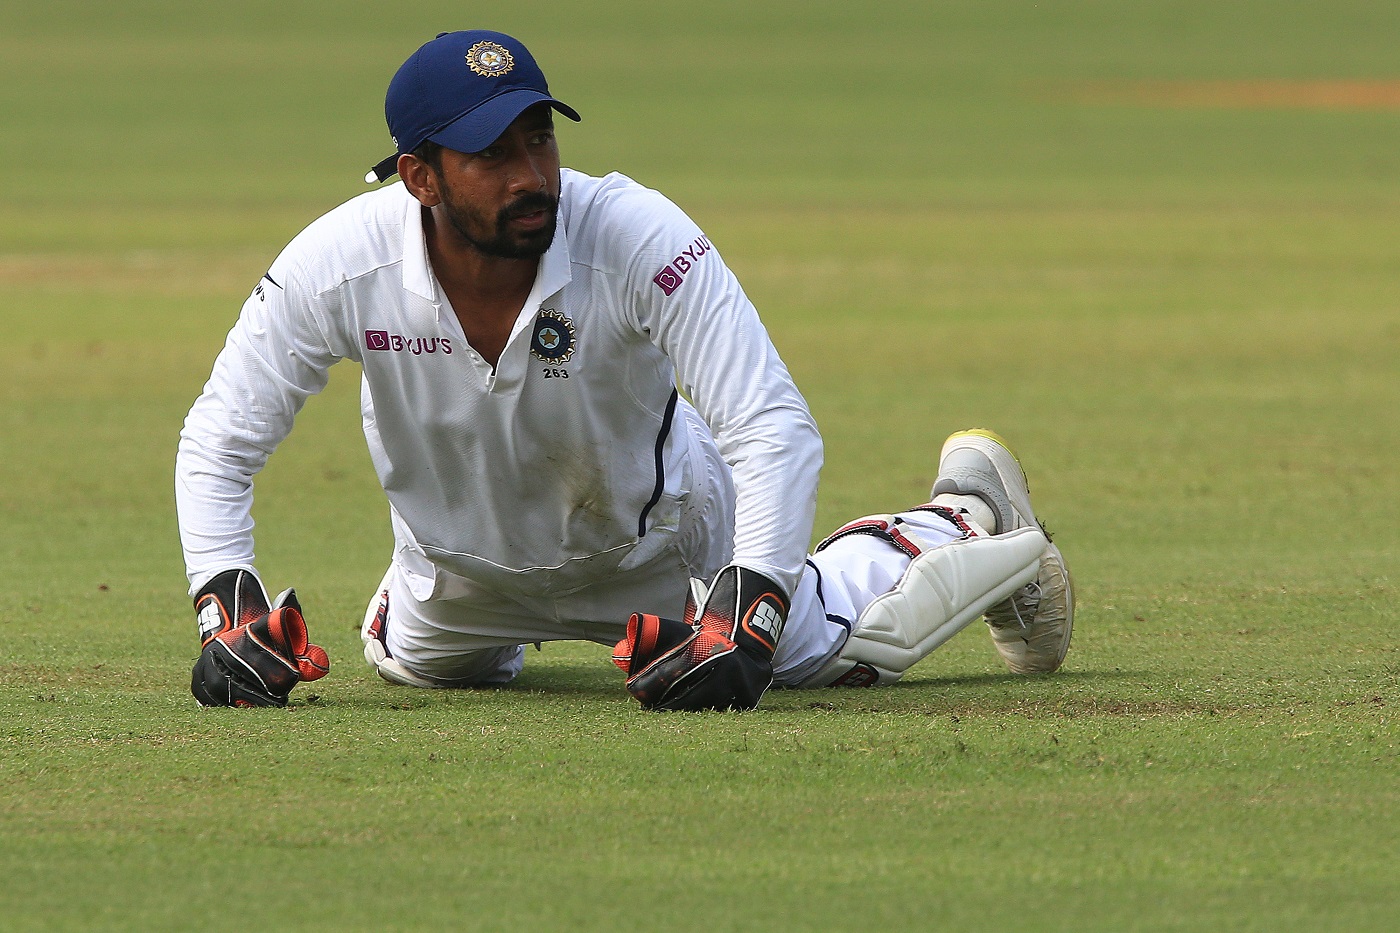 Wriddhiman Saha, After Recovering From COVID-19